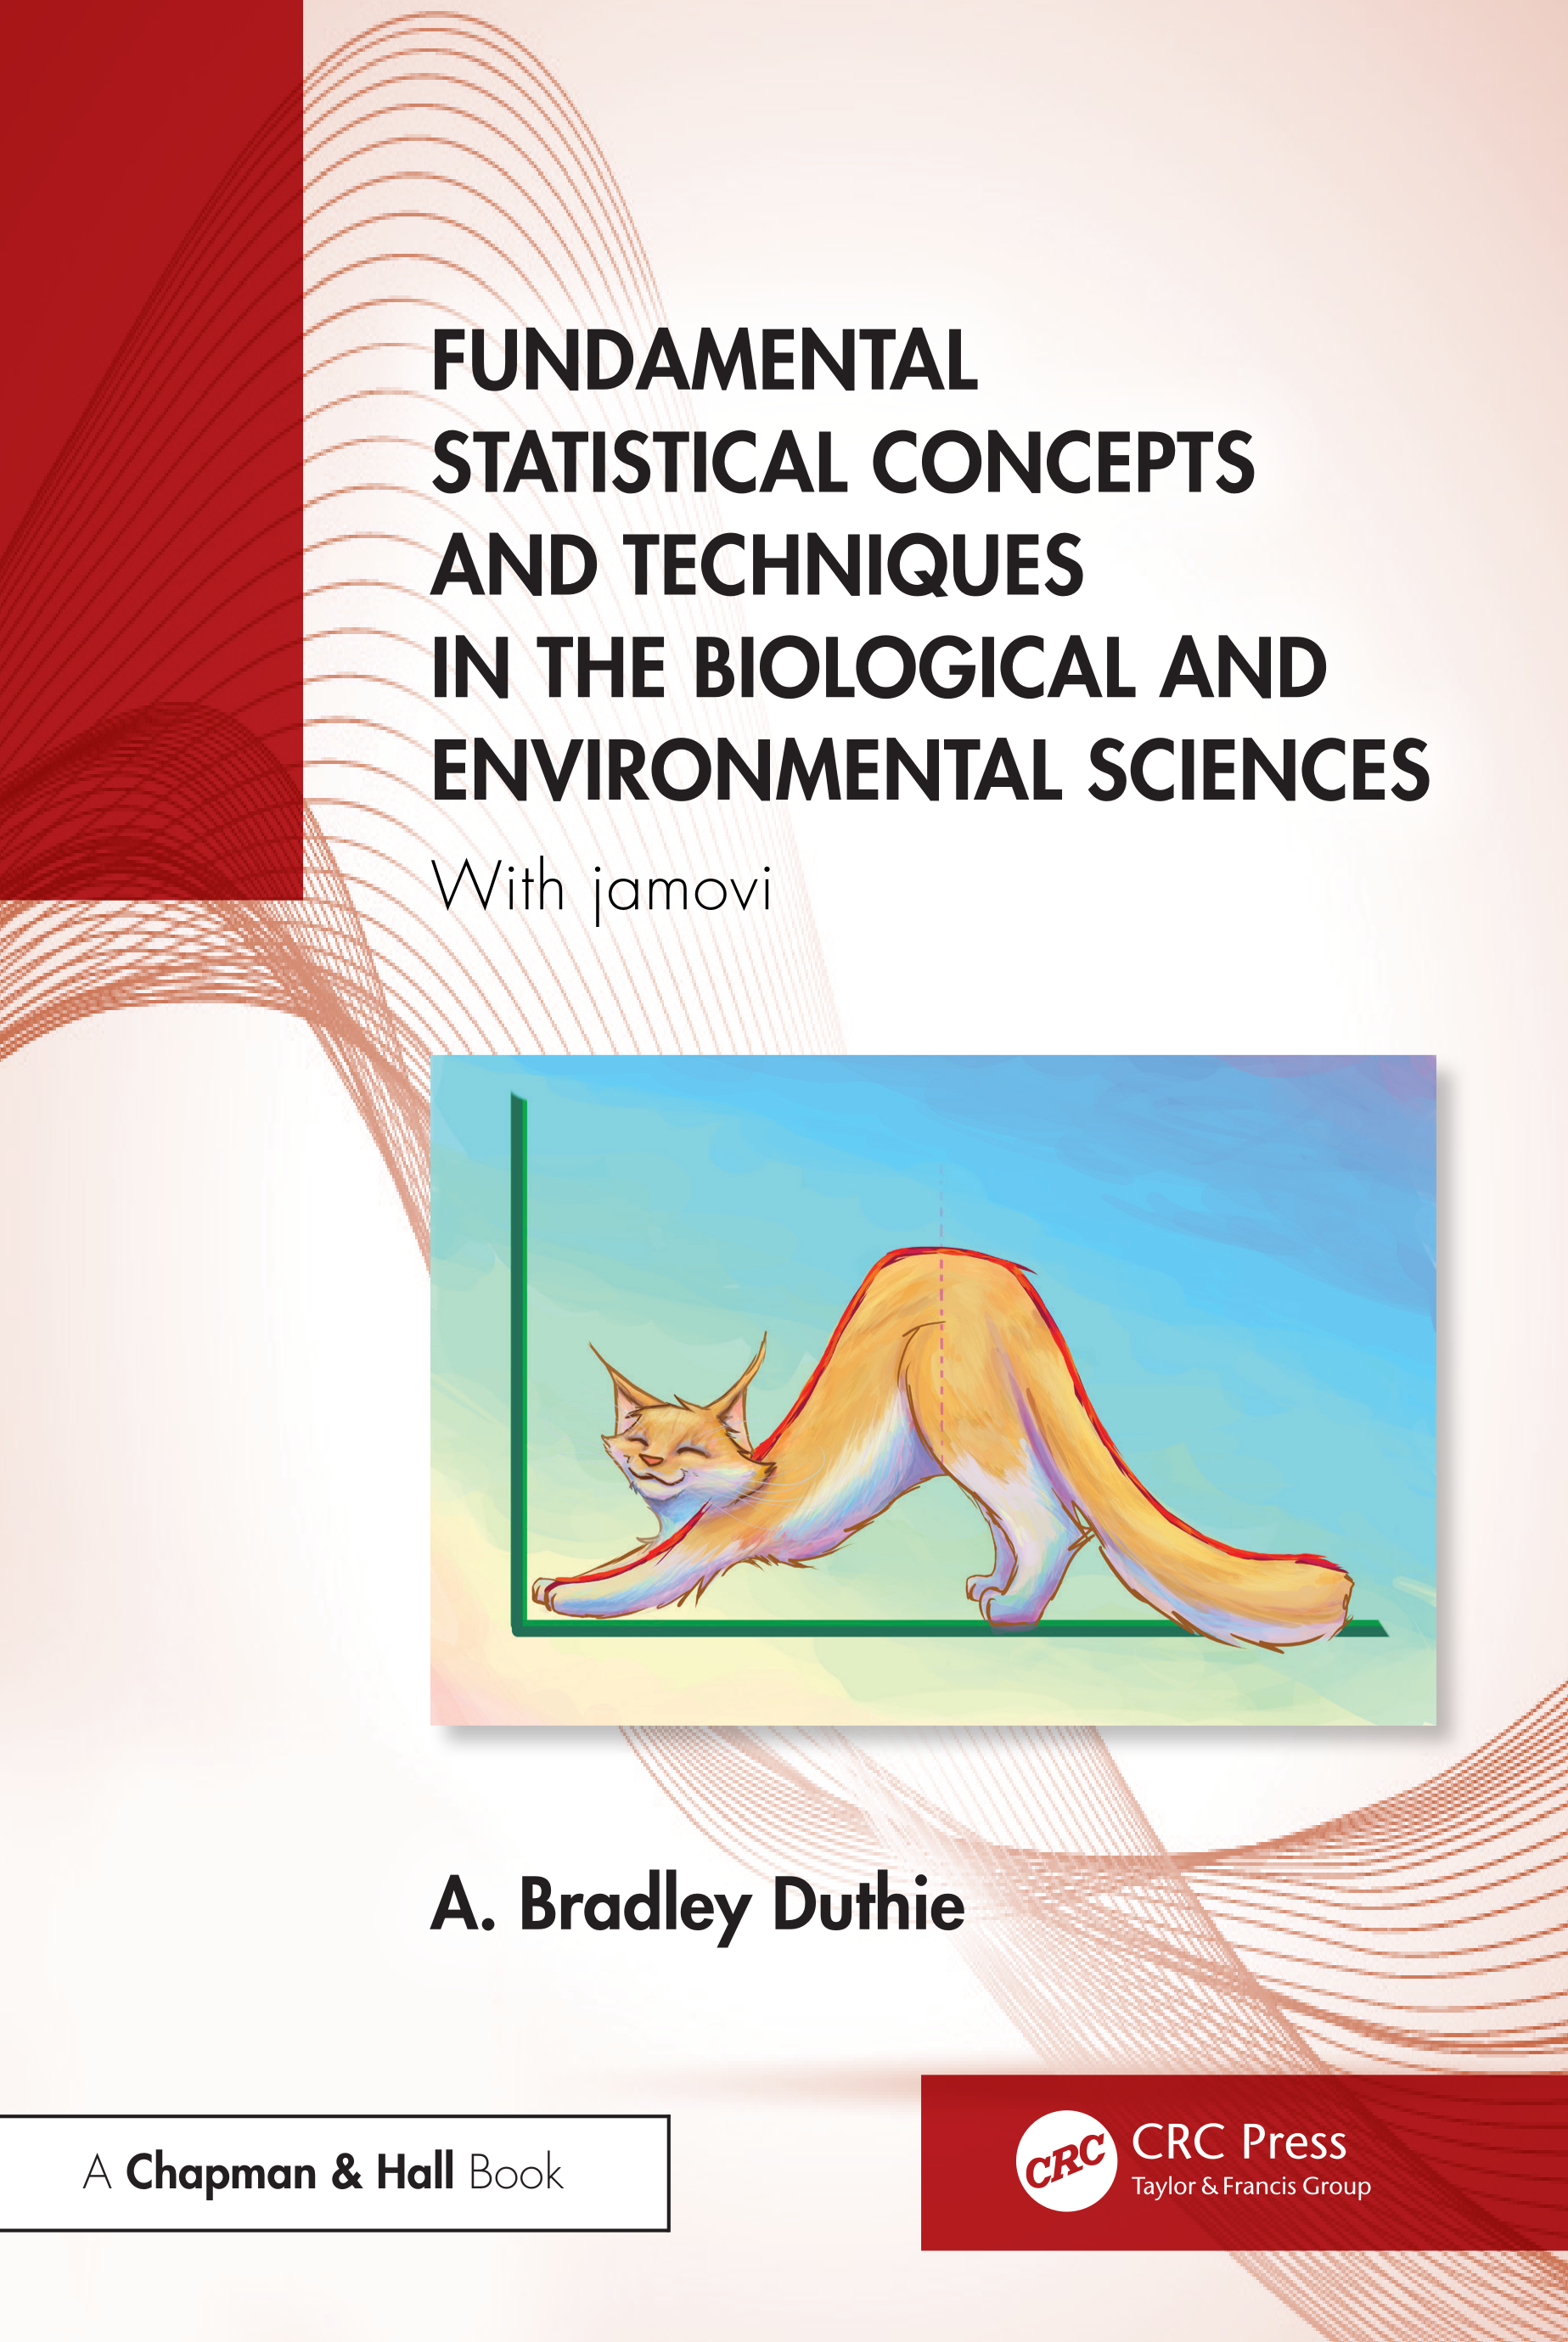 Fundamental statistical concepts and techniques in the biological and environmental sciences: With jamovi